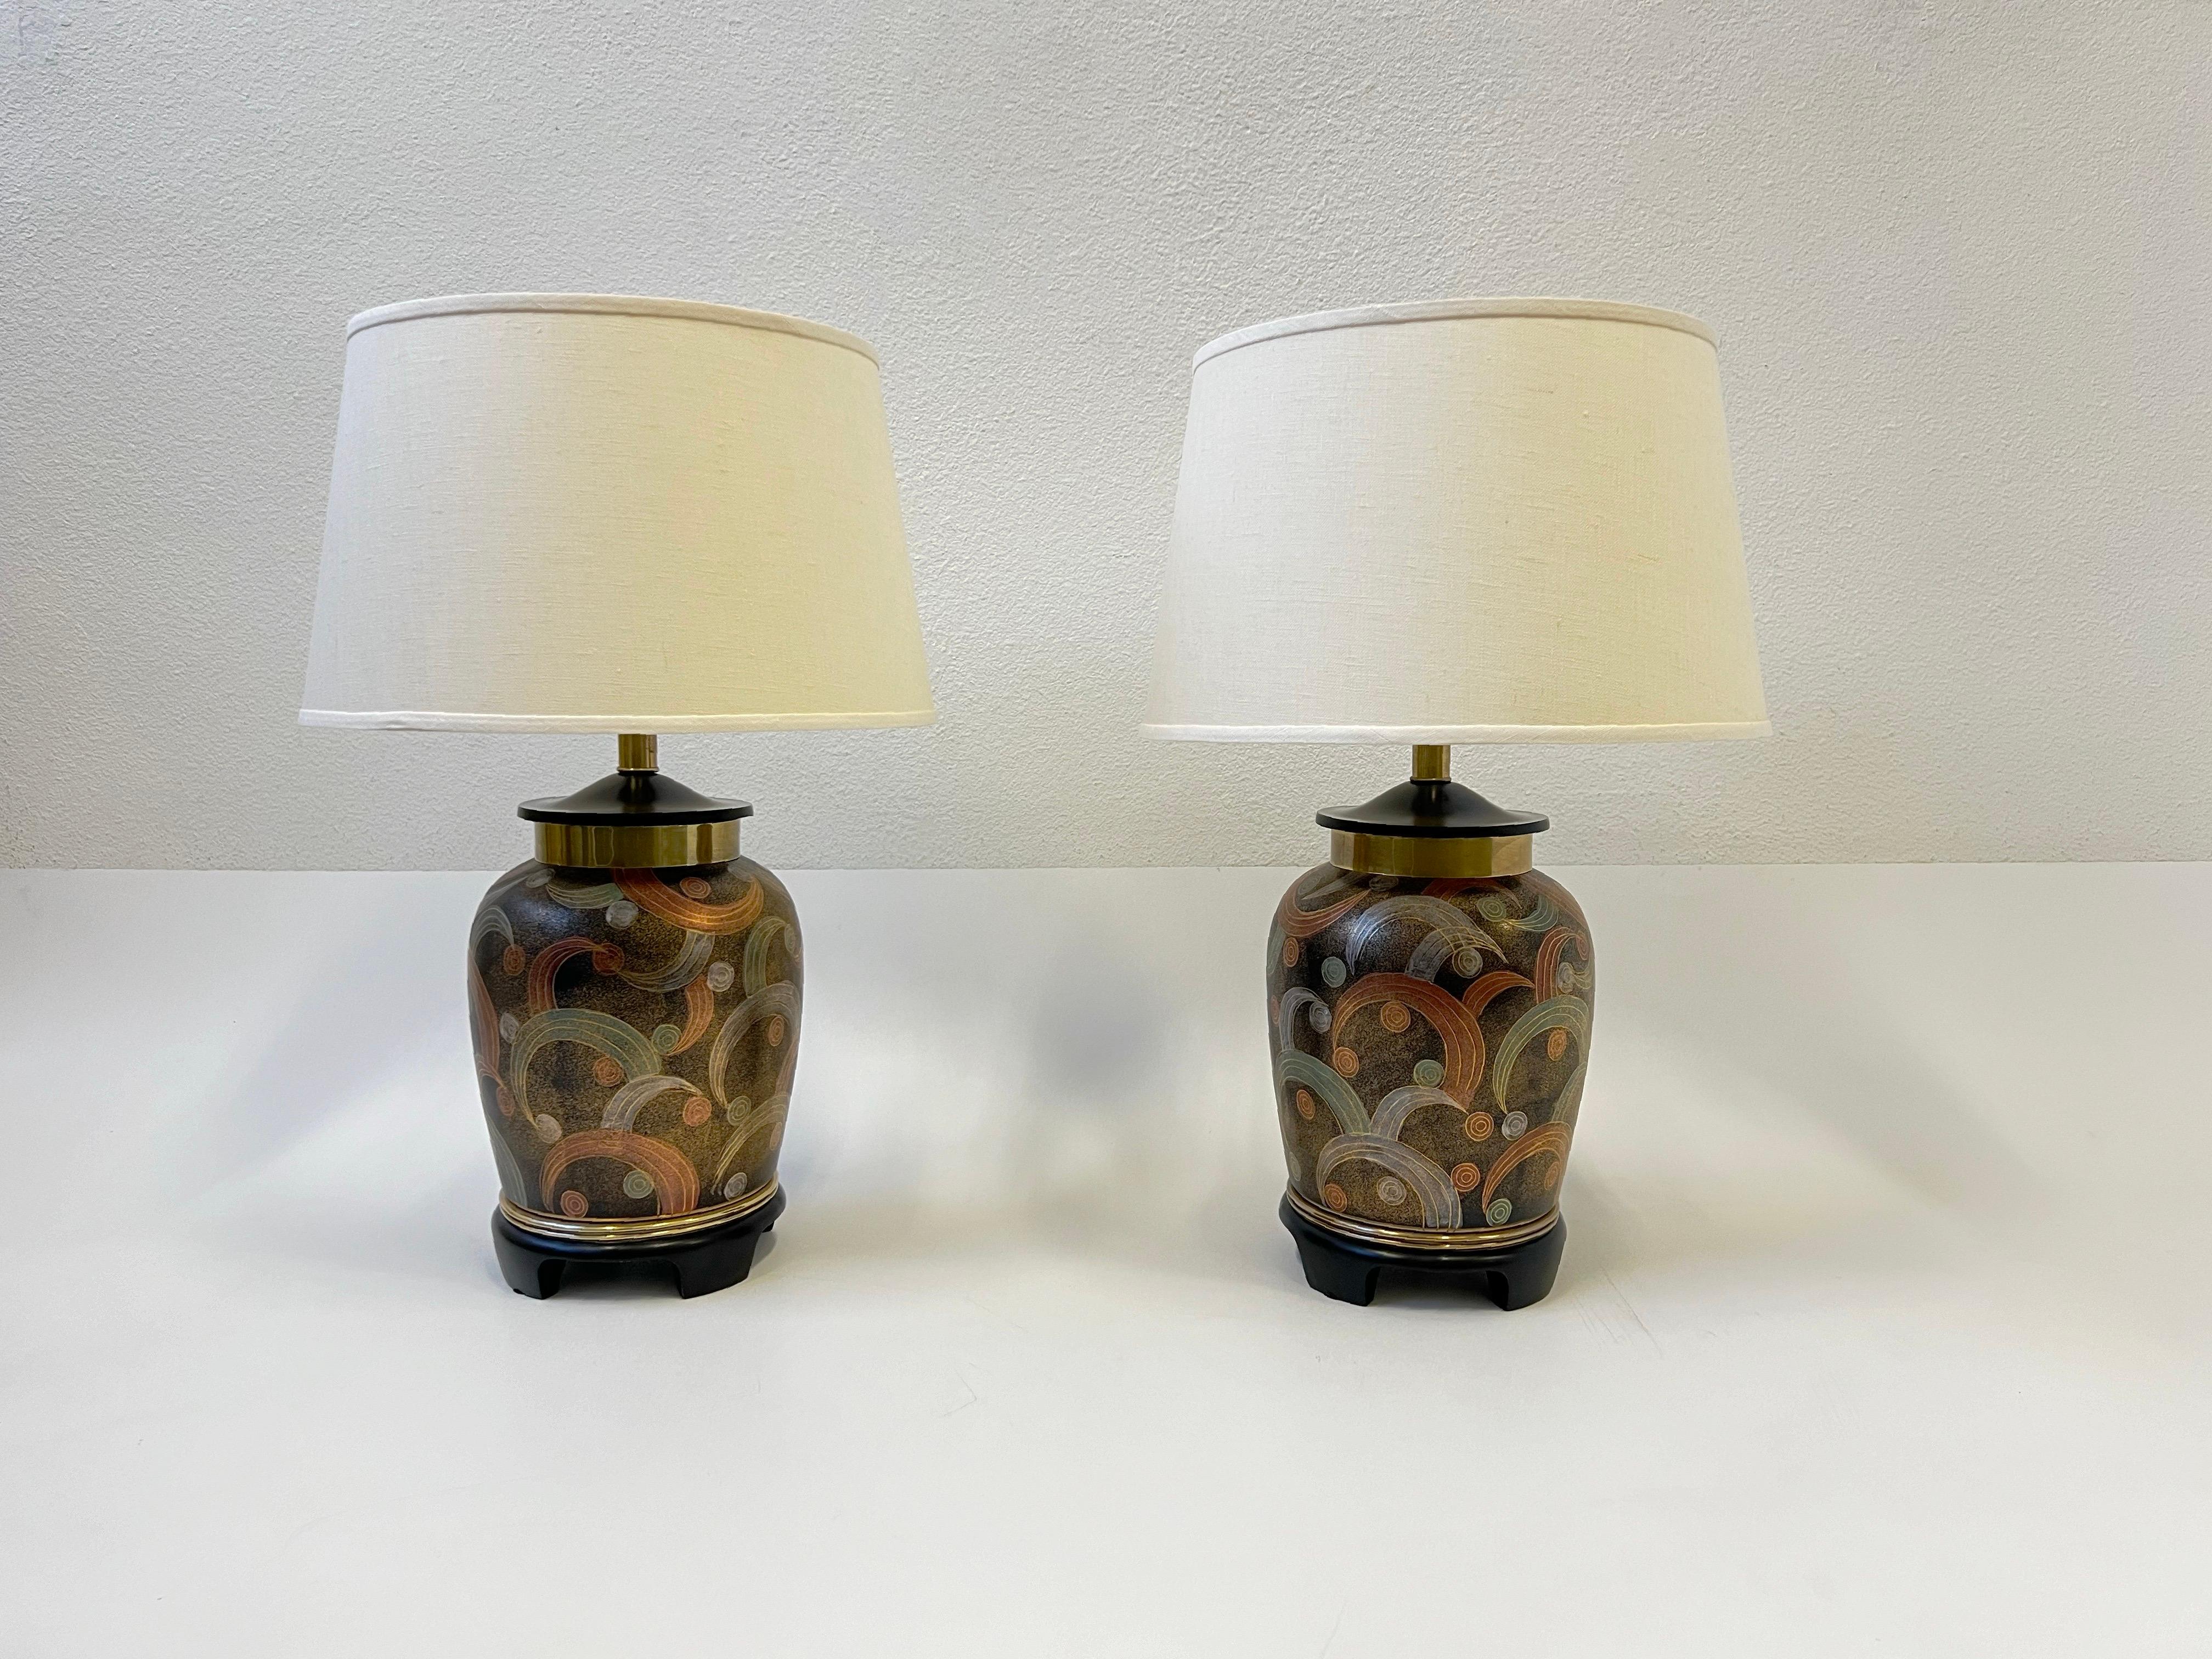 1980’s hand painted porcelain urn table lamps by Frederick Cooper Chicago. 
Constructed with hand painted porcelain urns, brass hardware, black lacquer base with new vanilla linen shades. 
They take 150w max Edison bulb. 

Measurements: 9” Diameter,